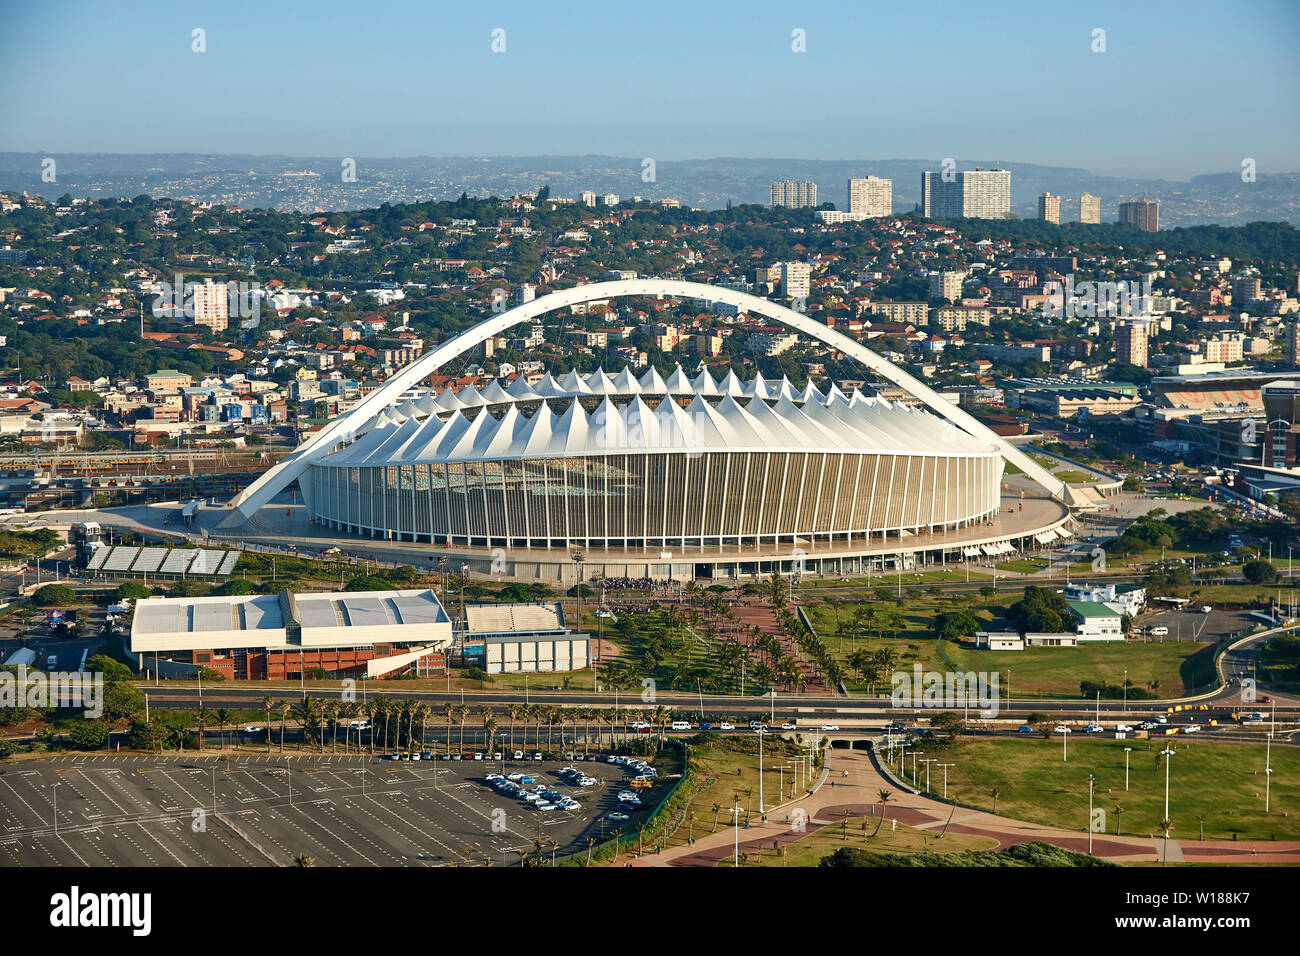 Drone aerial view of Moses Mabhida Stadium and city of Durban. Kwazulu Natal, South Africa. Full colour horizontal image. Stock Photo